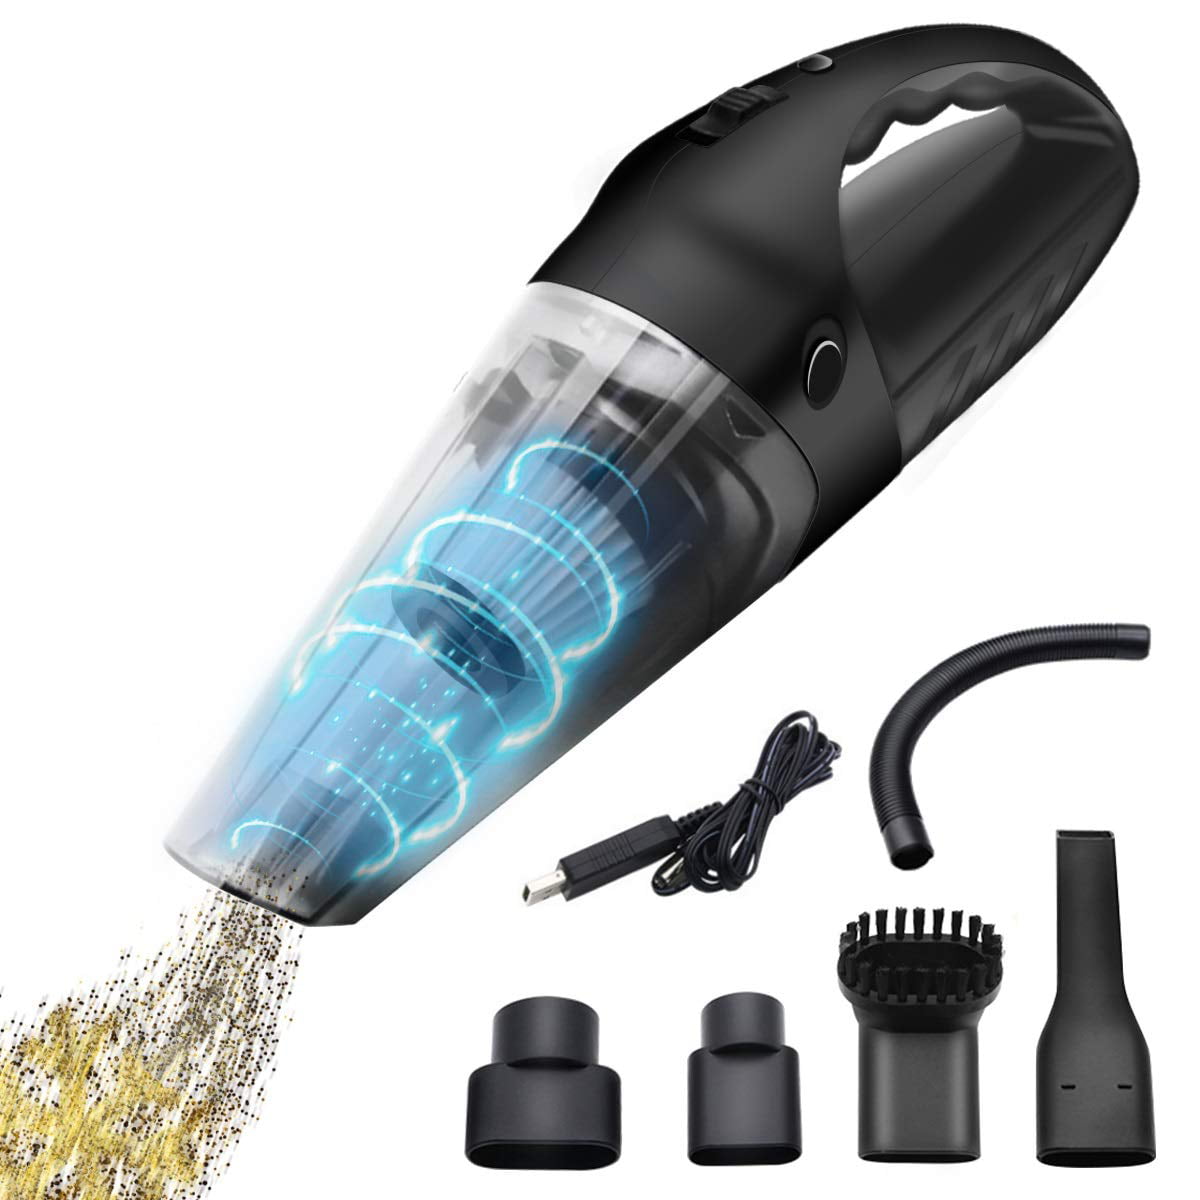 Baoblaze Handheld Vacuum Cleaner Cordless USB Rechargeable 5000pa Strong Suction Lightweight Wet/Dry Vacuum for Home Pet Hair Car Cleaning 